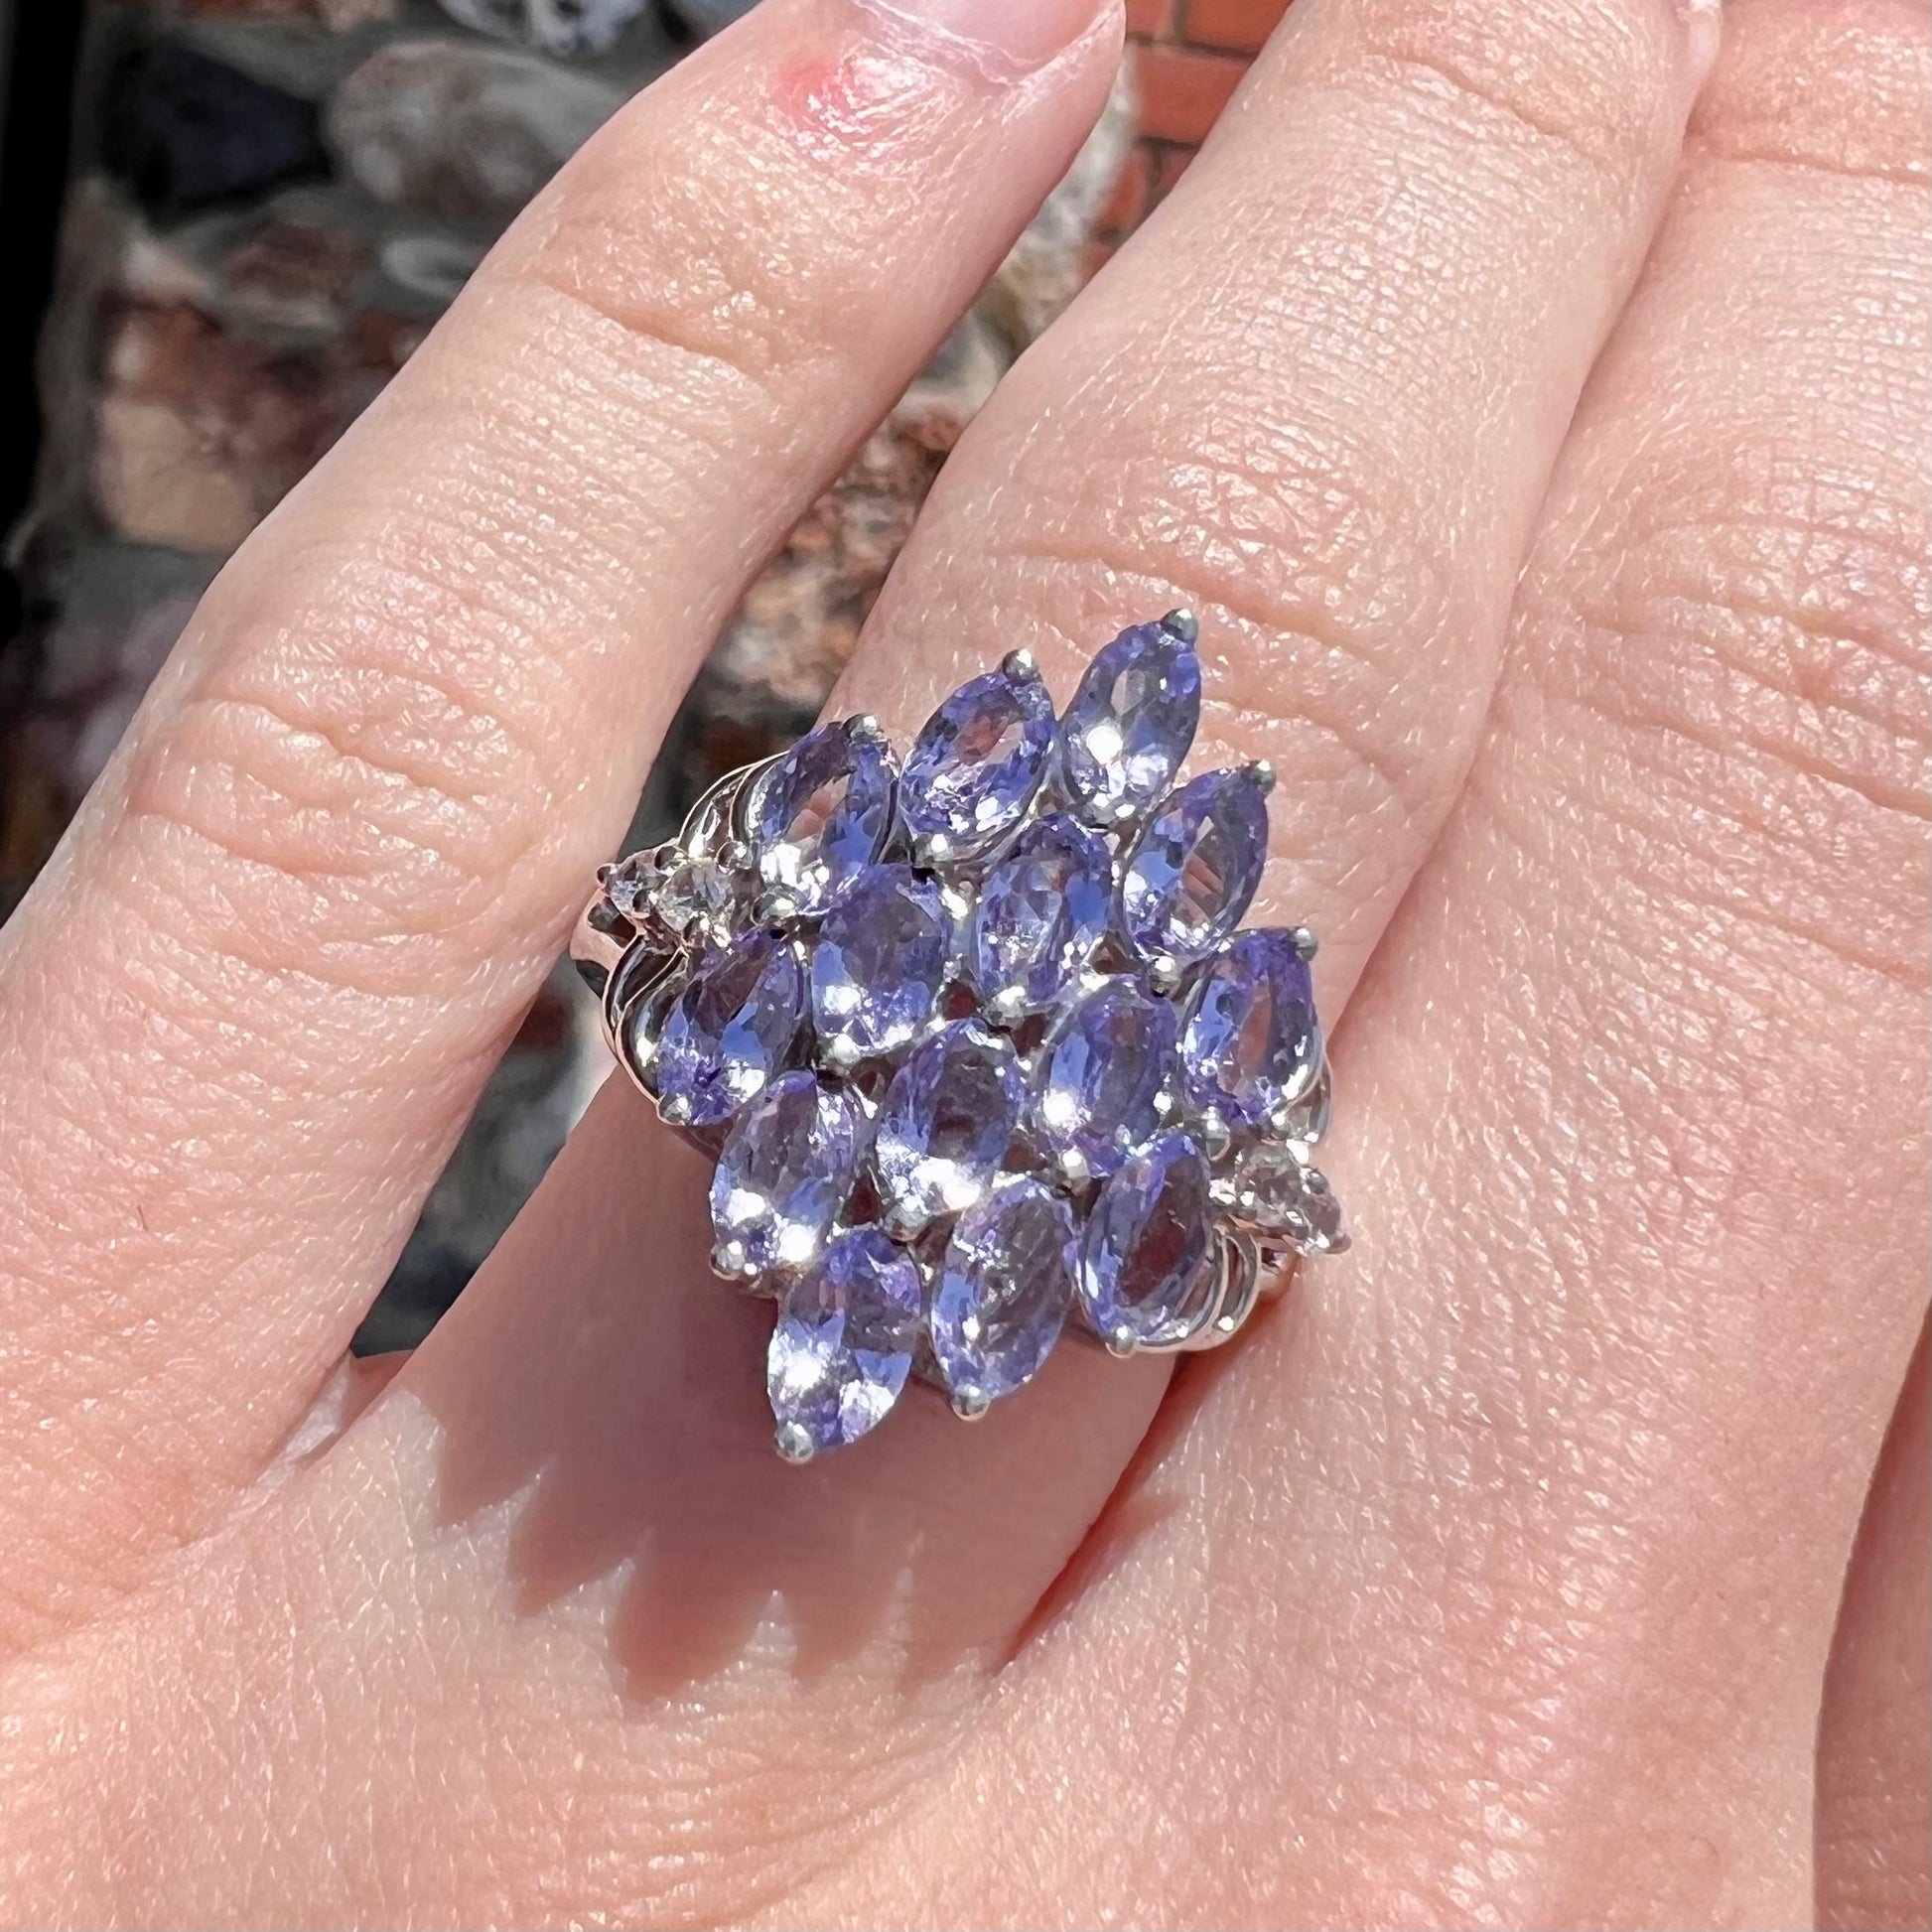 A sterling silver gemstone cluster ring set with oval cut tanzanite stones and round cubic zirconia accents.